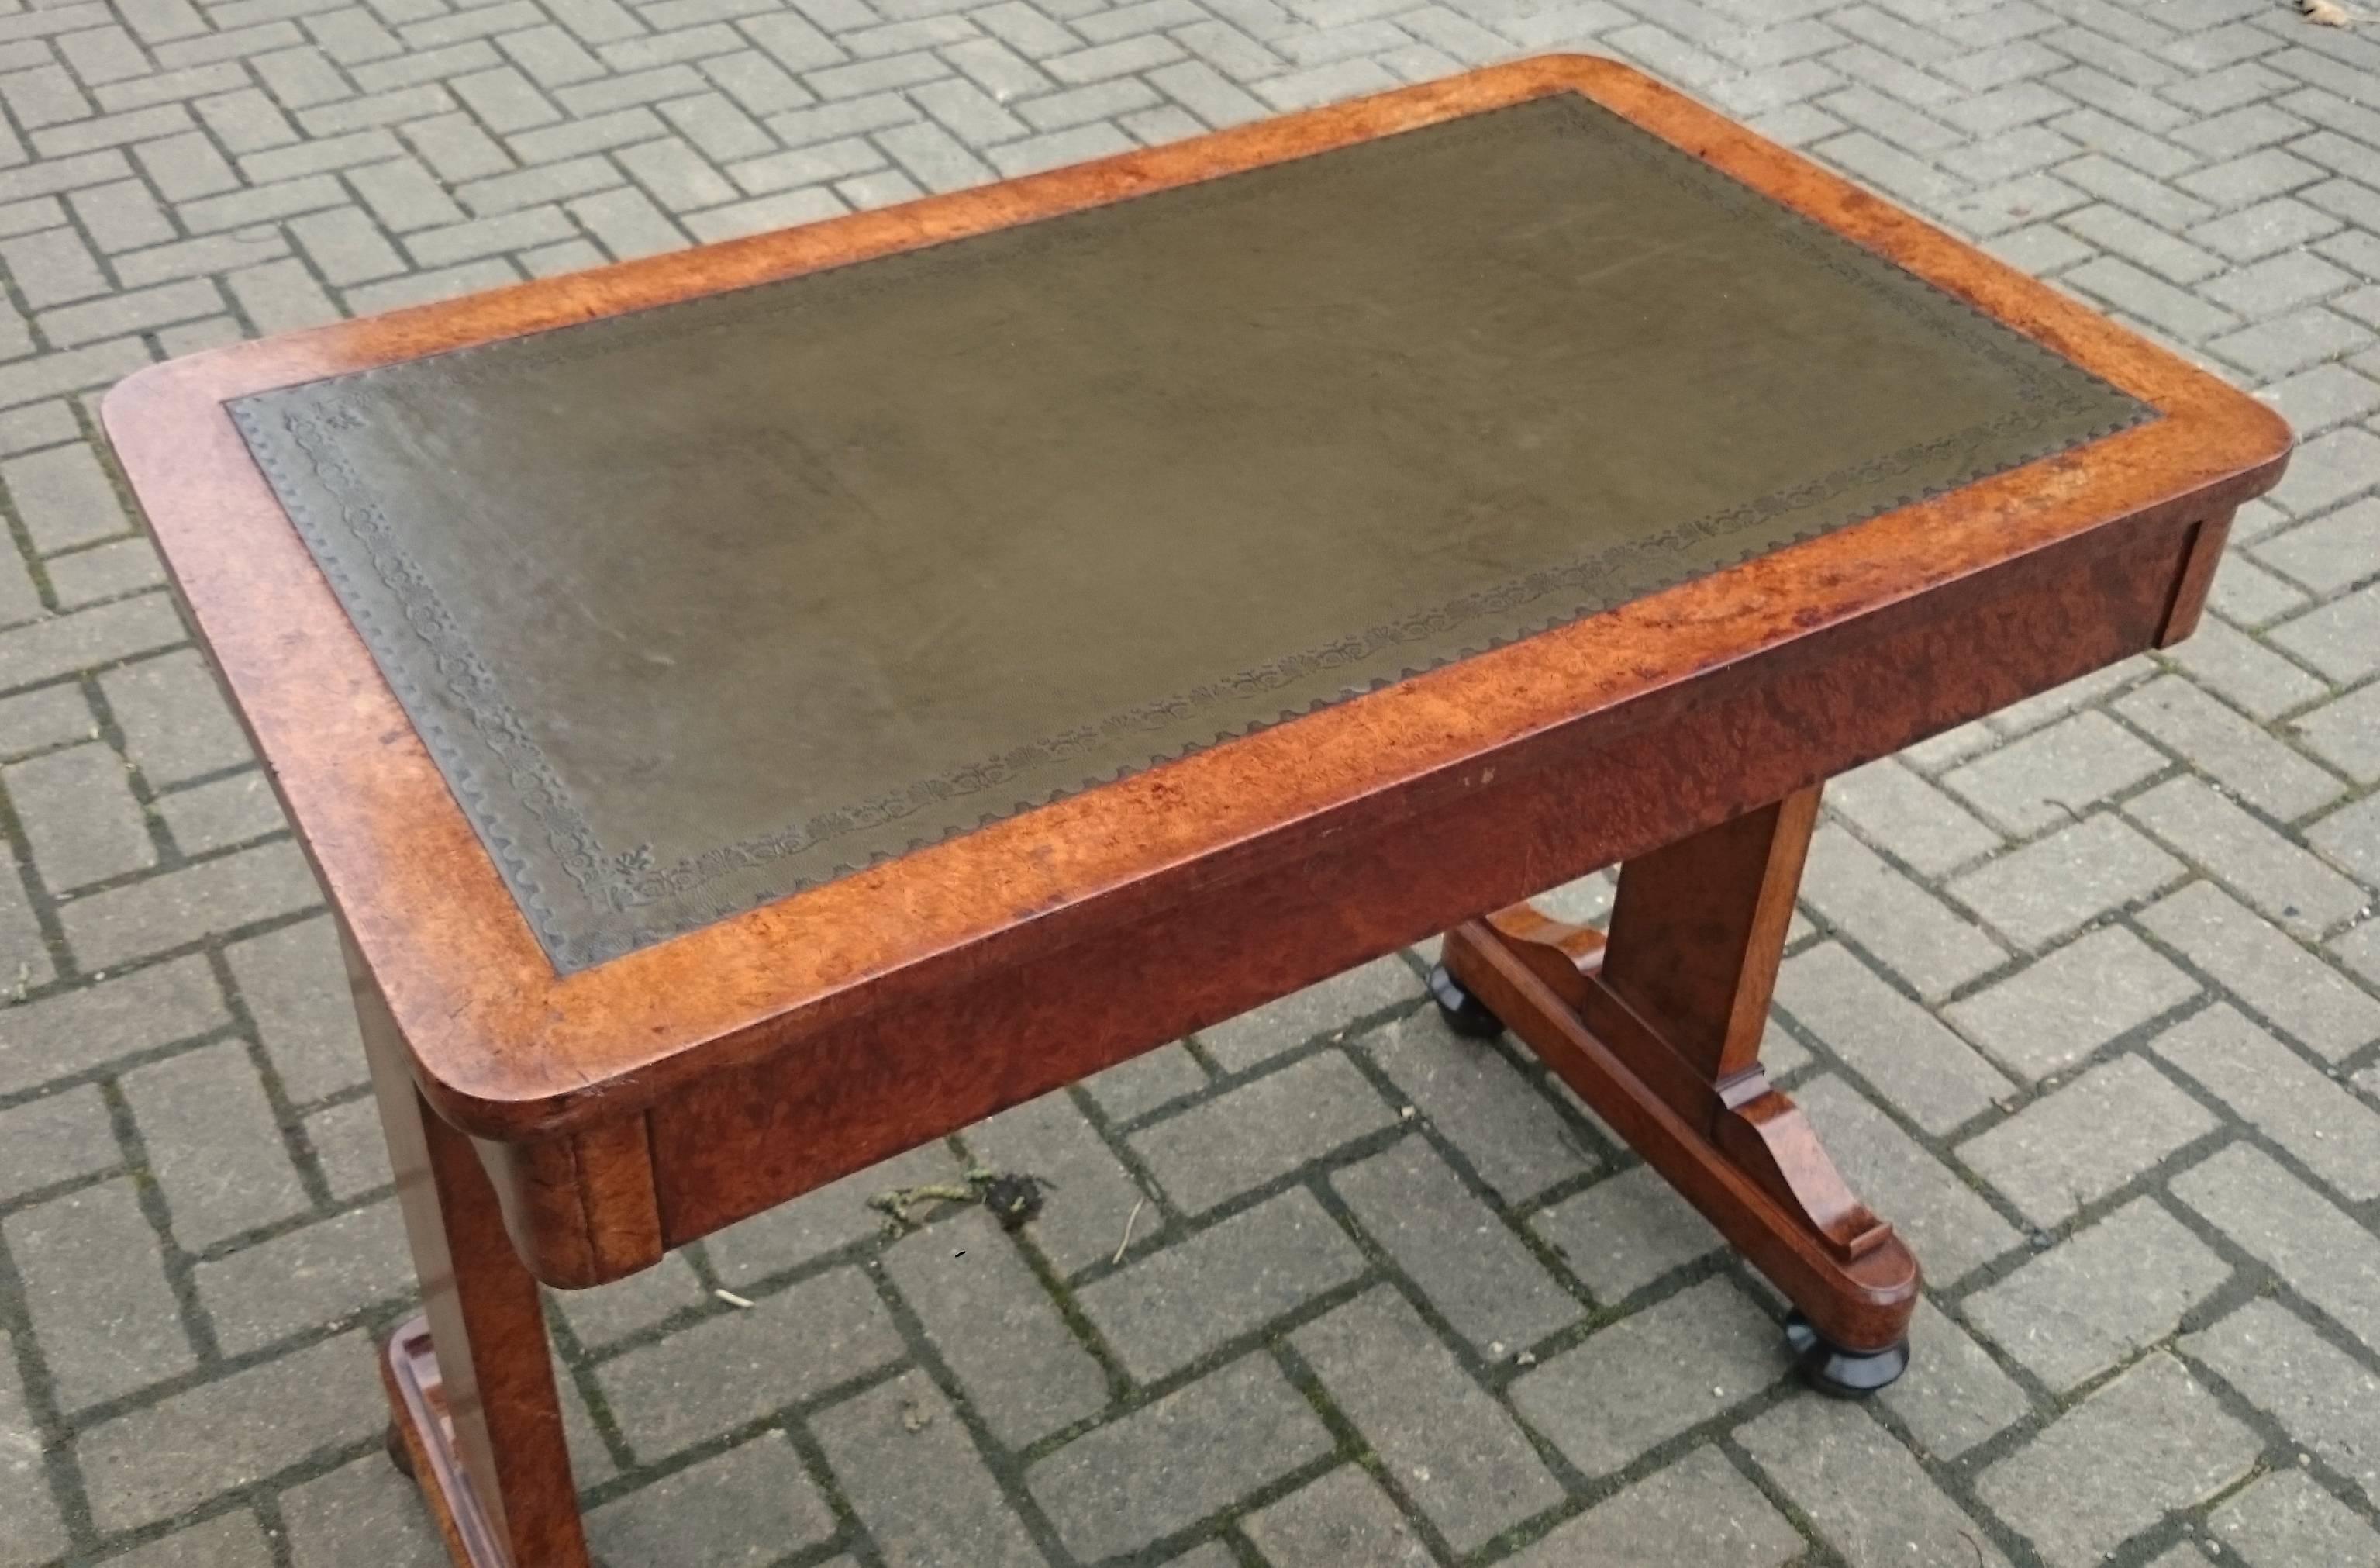 Rare and Important Regency Writing Table Made of Expensive Aboyna Wood 1